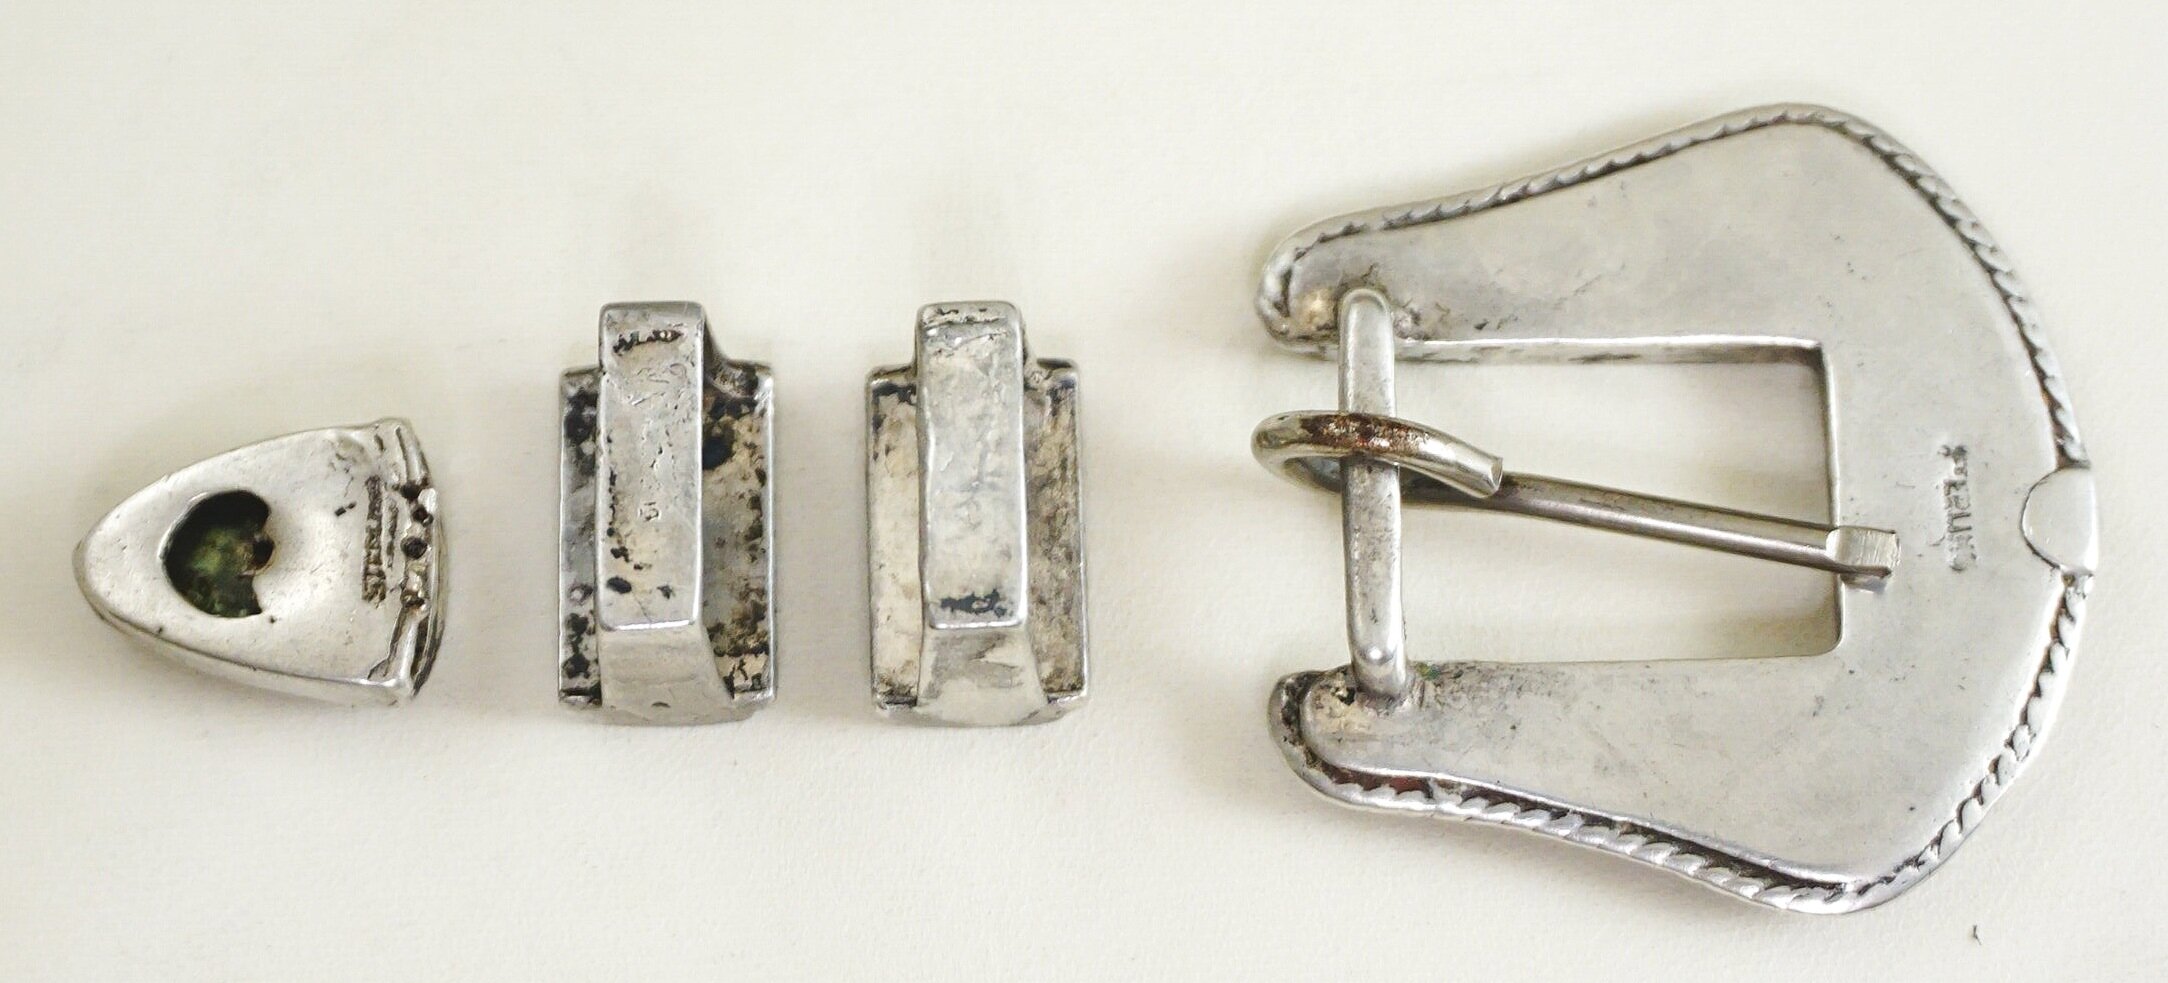 Western Sterling Overlay Buckle Tips--4 sizes available 3/8", 5/8", 1/2", 3/4" 